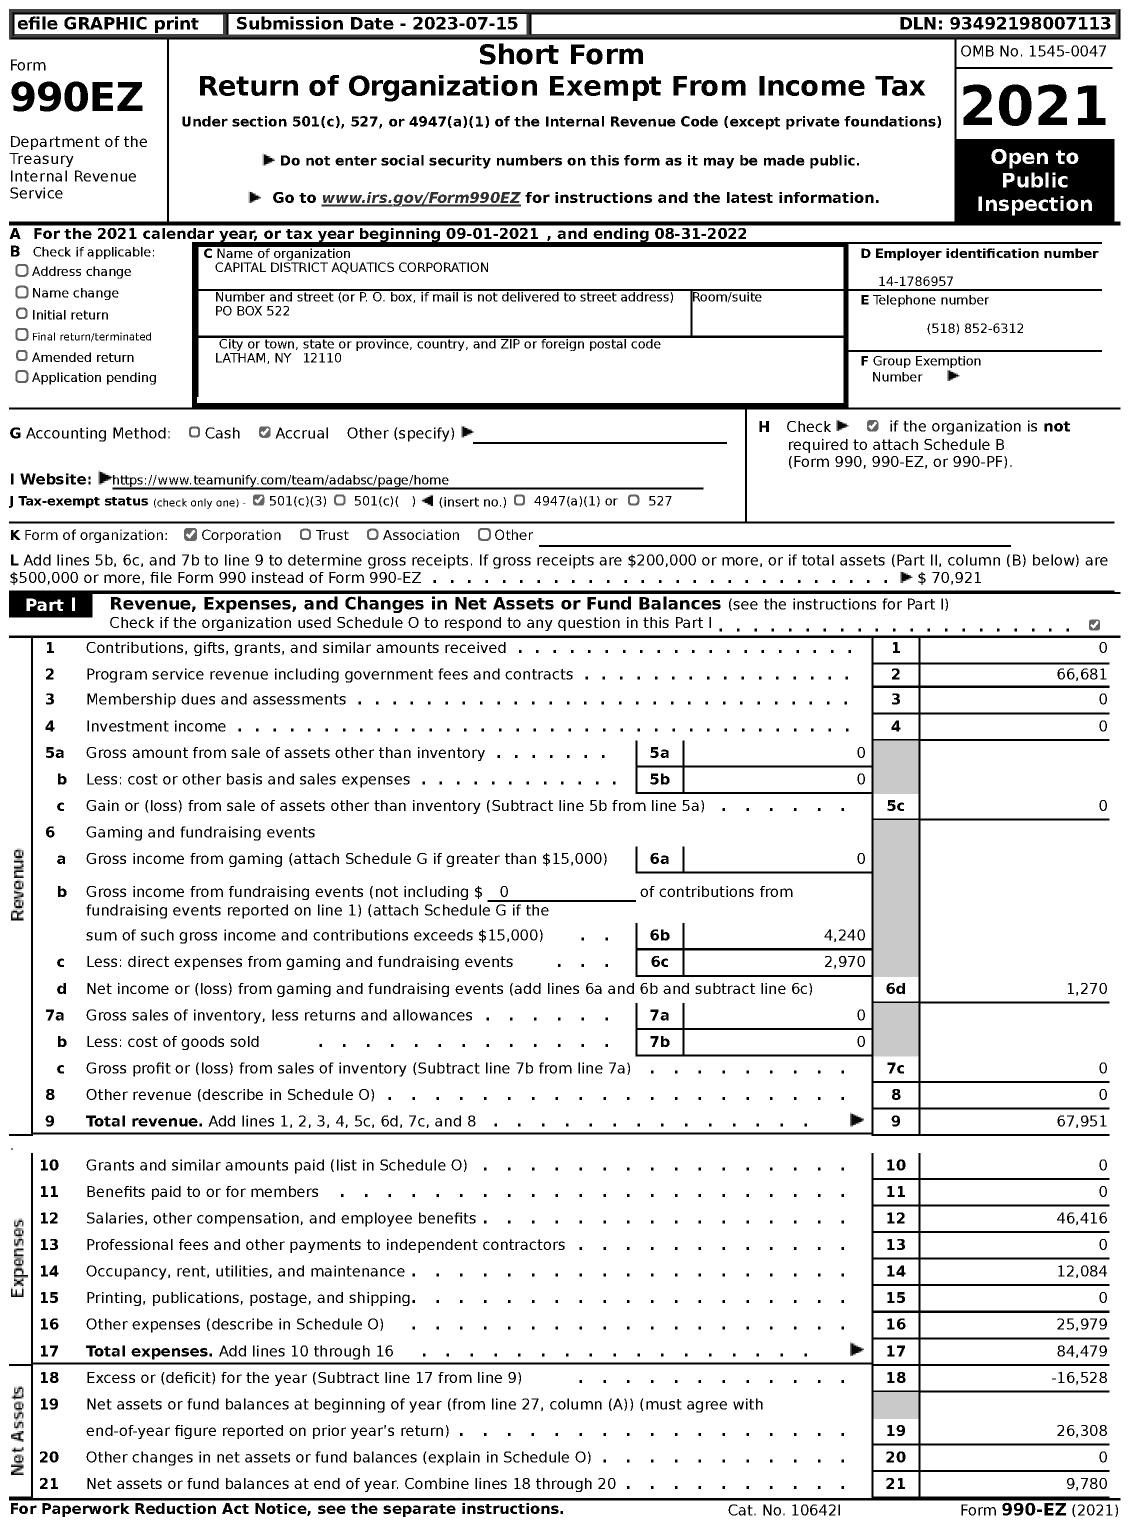 Image of first page of 2021 Form 990EZ for Capital District Aquatics Corporation